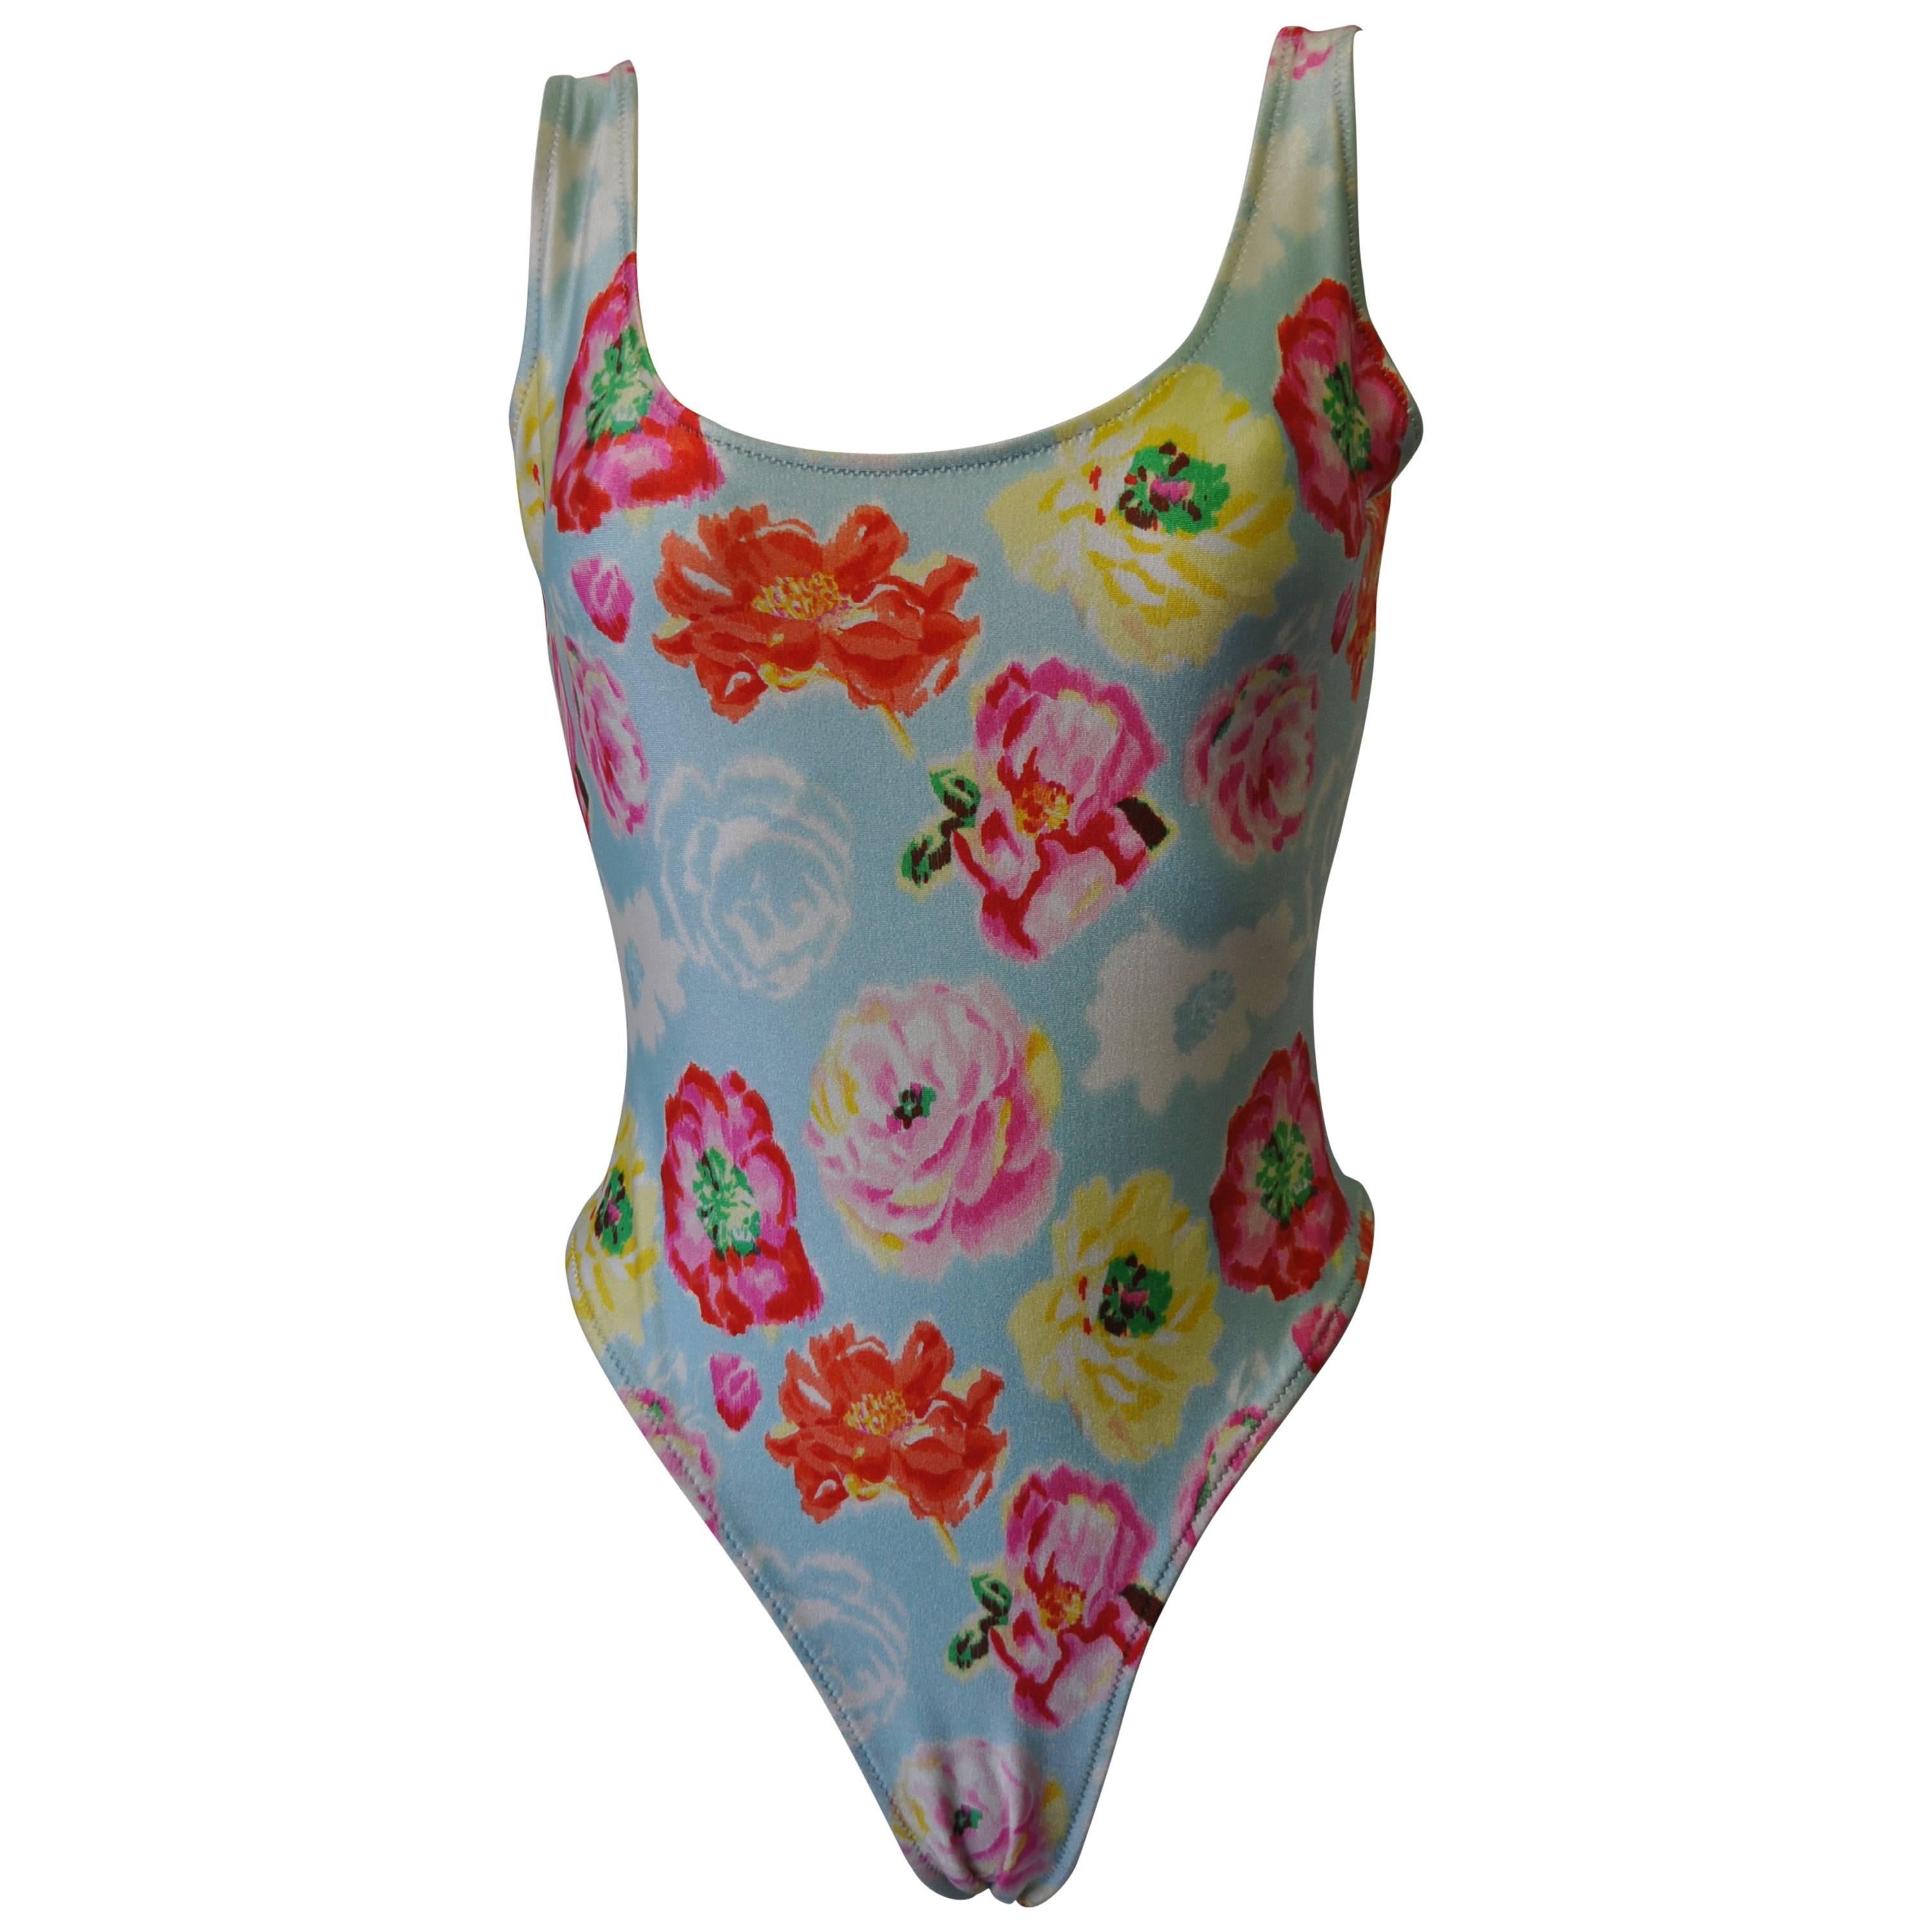 Gianni Versace Istante Mare Spring Floral Bathing Suit